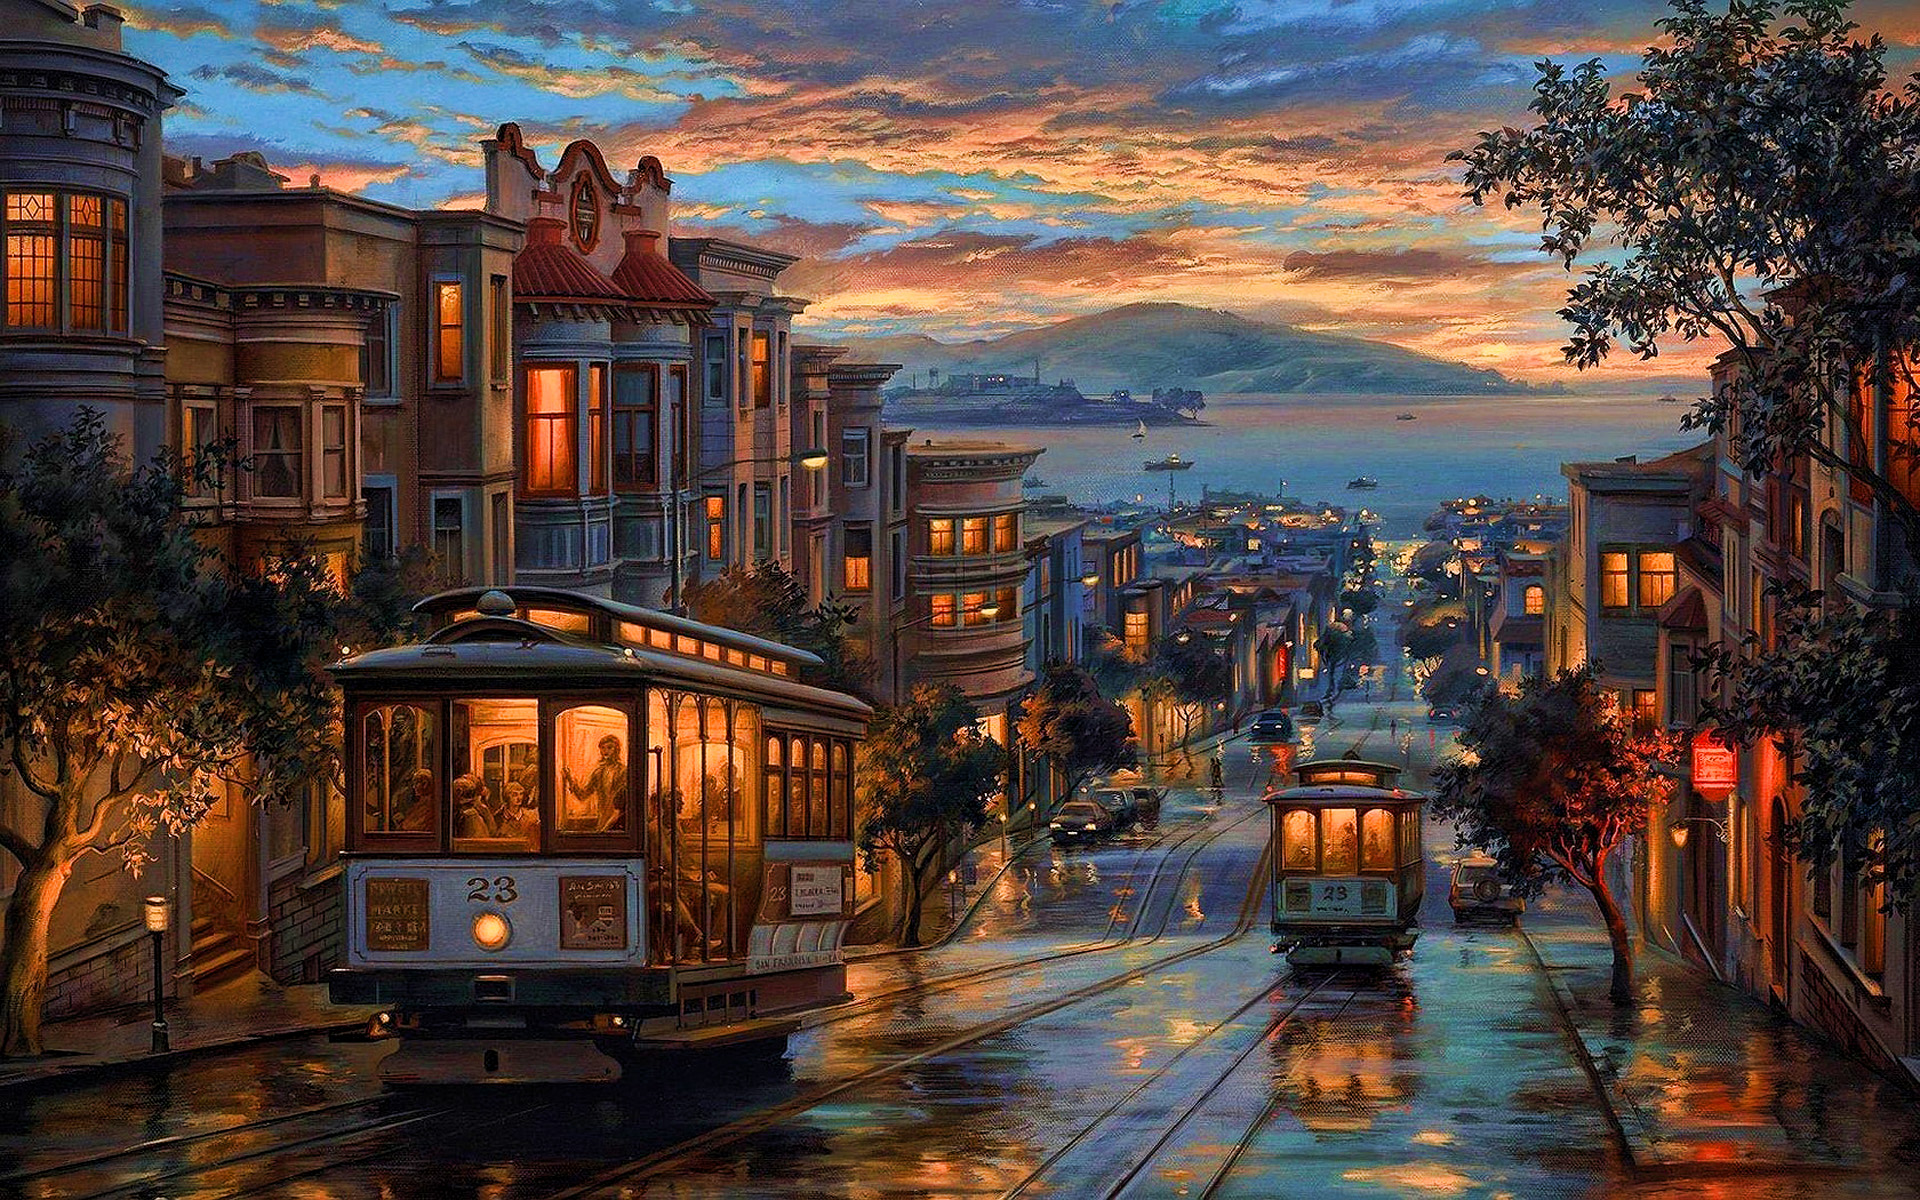 Download wallpaper San Francisco, artwork, trams, street, hills, american cities, California, Drawn San Francisco, City of San Francisco, USA, Cities of California, America for desktop with resolution 1920x1200. High Quality HD picture